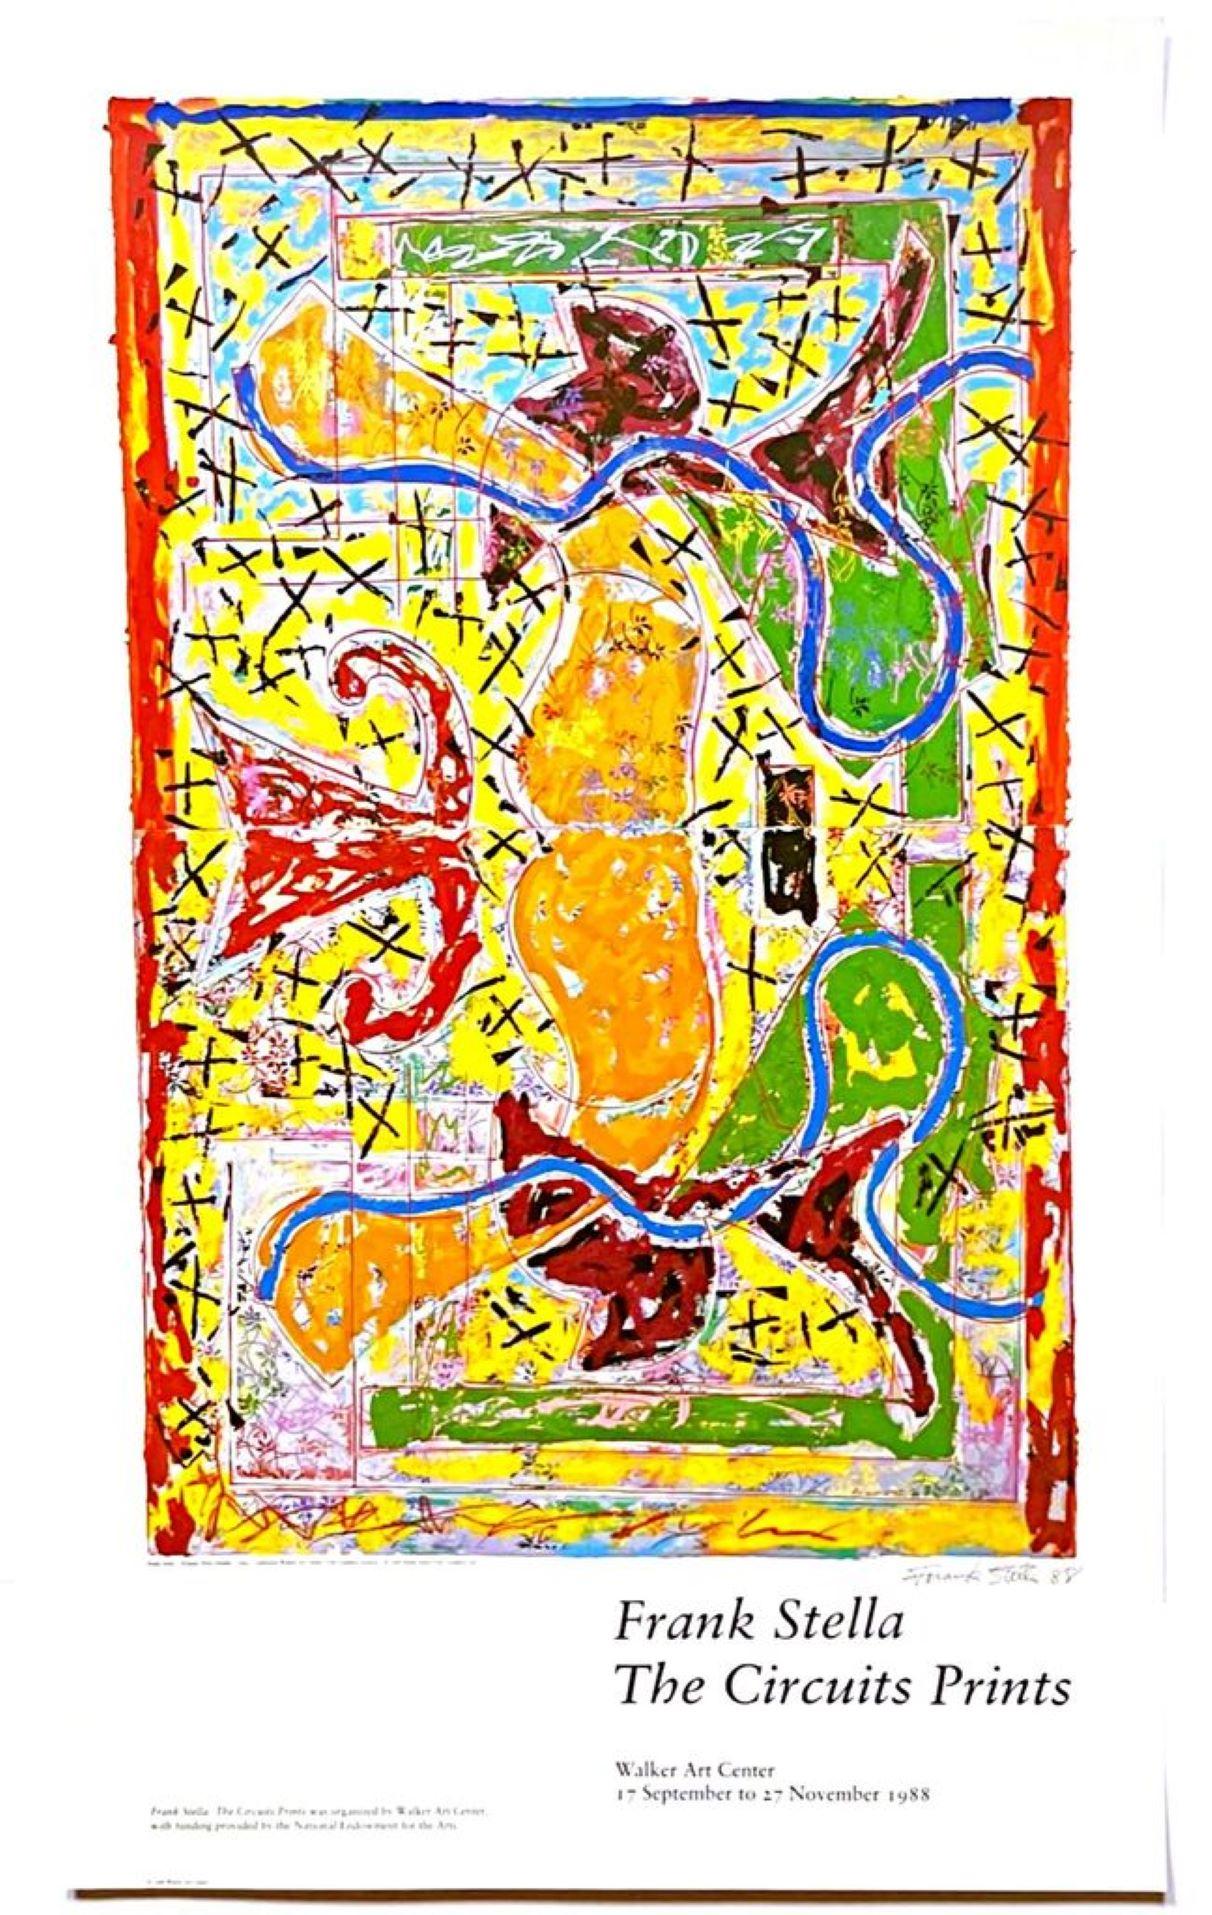 Frank Stella
Frank Stella The Circuit Prints (Hand Signed), 1988
Color offset lithograph poster (hand signed by Frank Stella)
Signed and dated 88 in ink by Frank Stella directly underneath the image
Edition of 500 (uniquely signed)
38 × 23